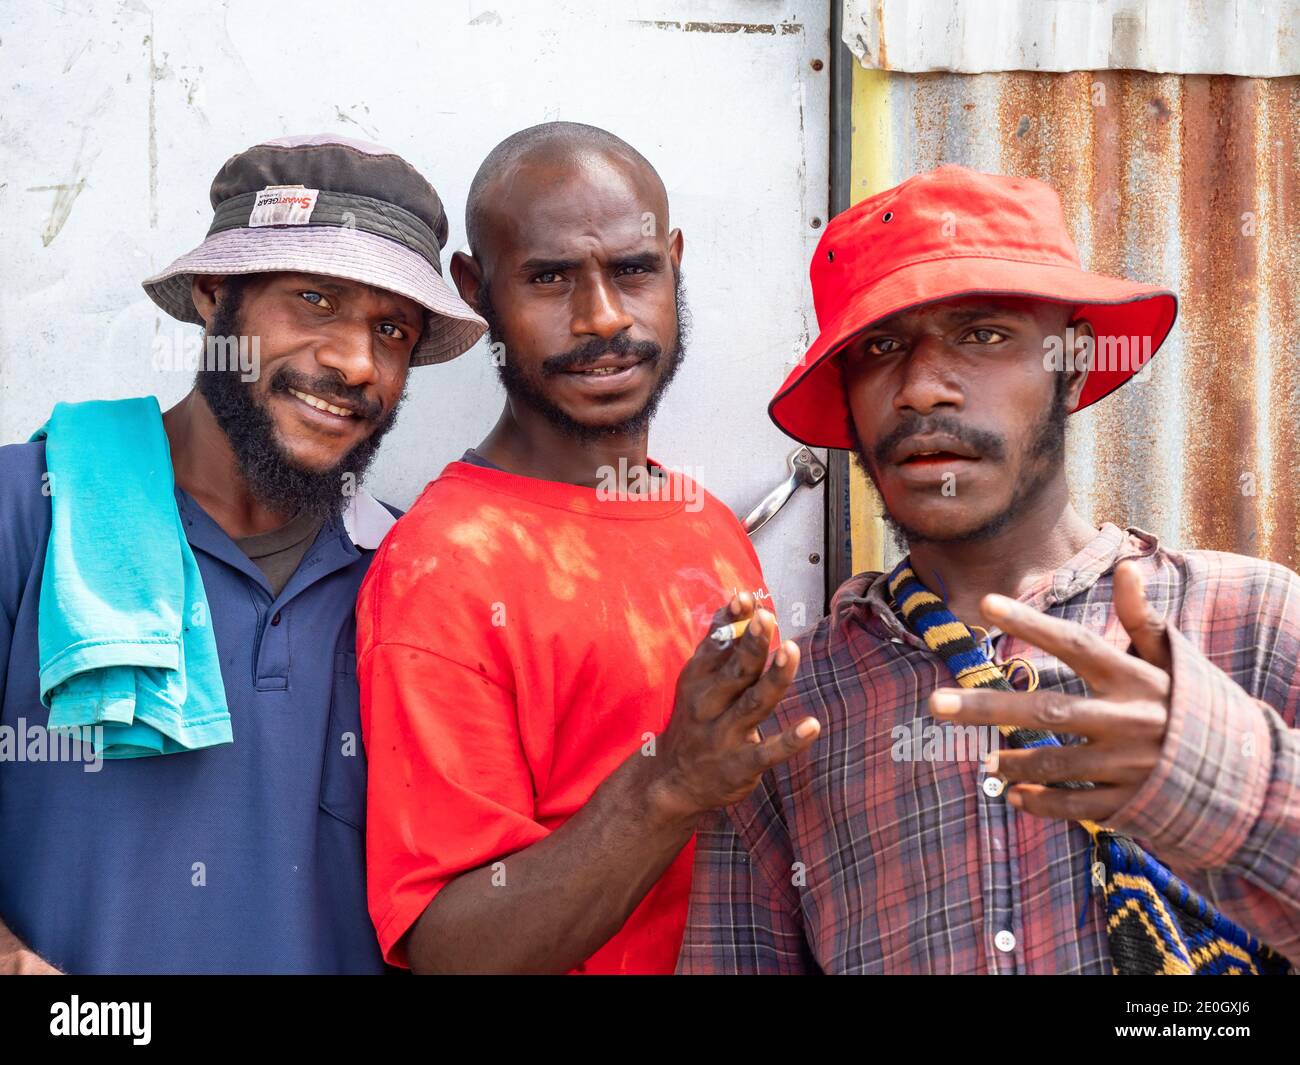 Local men hanging out in downtown Wewak, the capital of the East Sepik province of Papua New Guinea. Stock Photo